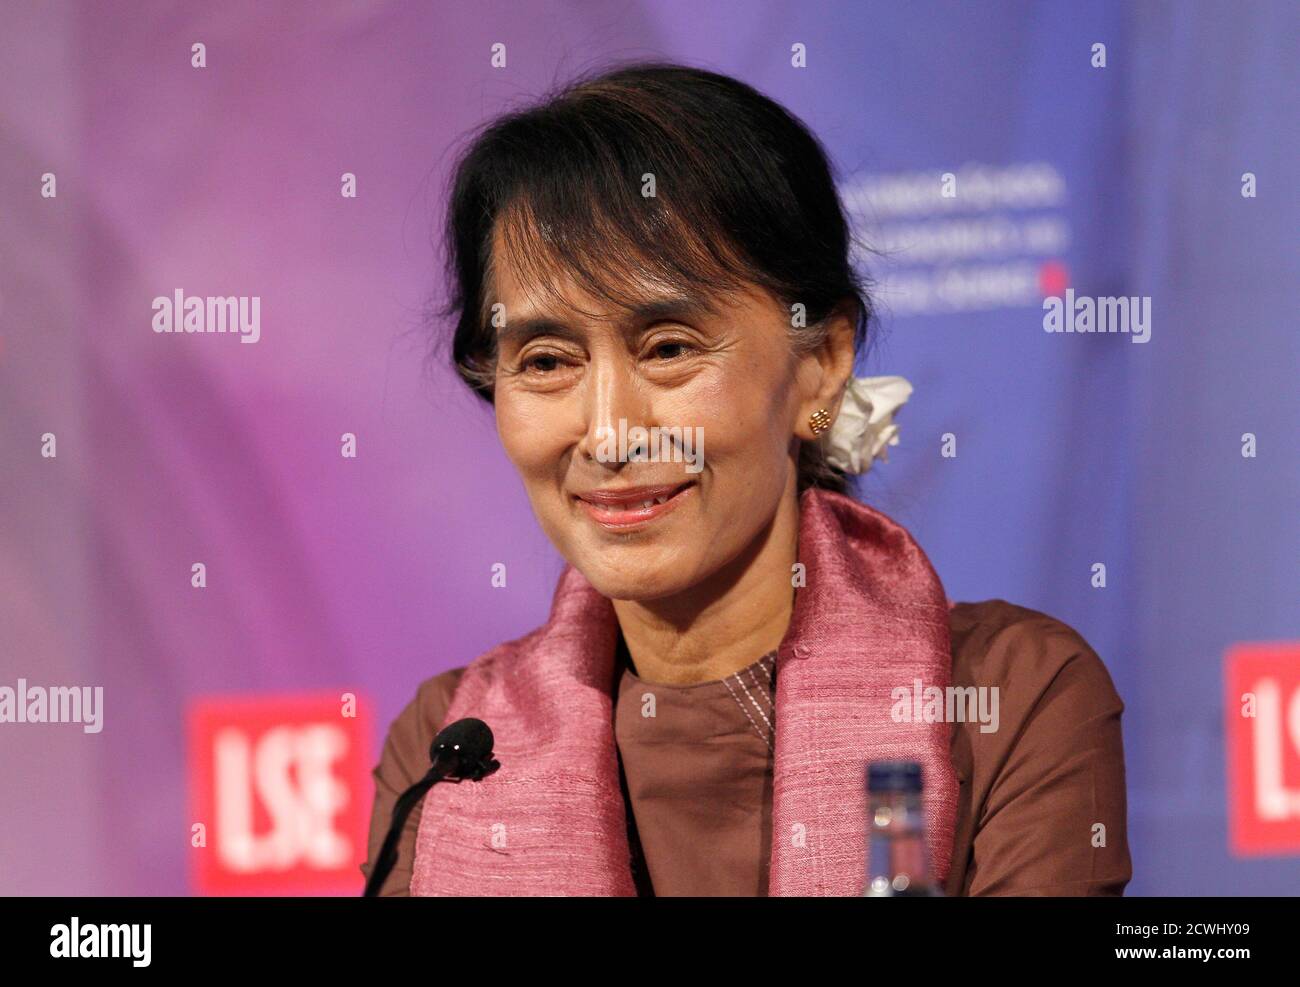 Myanmar pro-democracy leader Aung San Suu Kyi attends a discussion at the London School of Economics in central London June 19, 2012. Aung San Suu Kyi has returned to Europe for the first time since 1988, when she left her family life in Britain and found herself thrust into Myanmar's fight against dictatorship, mostly from the confines of her Yangon home.   REUTERS/Suzanne Plunkett   (BRITAIN - Tags: POLITICS SOCIETY) Stock Photo